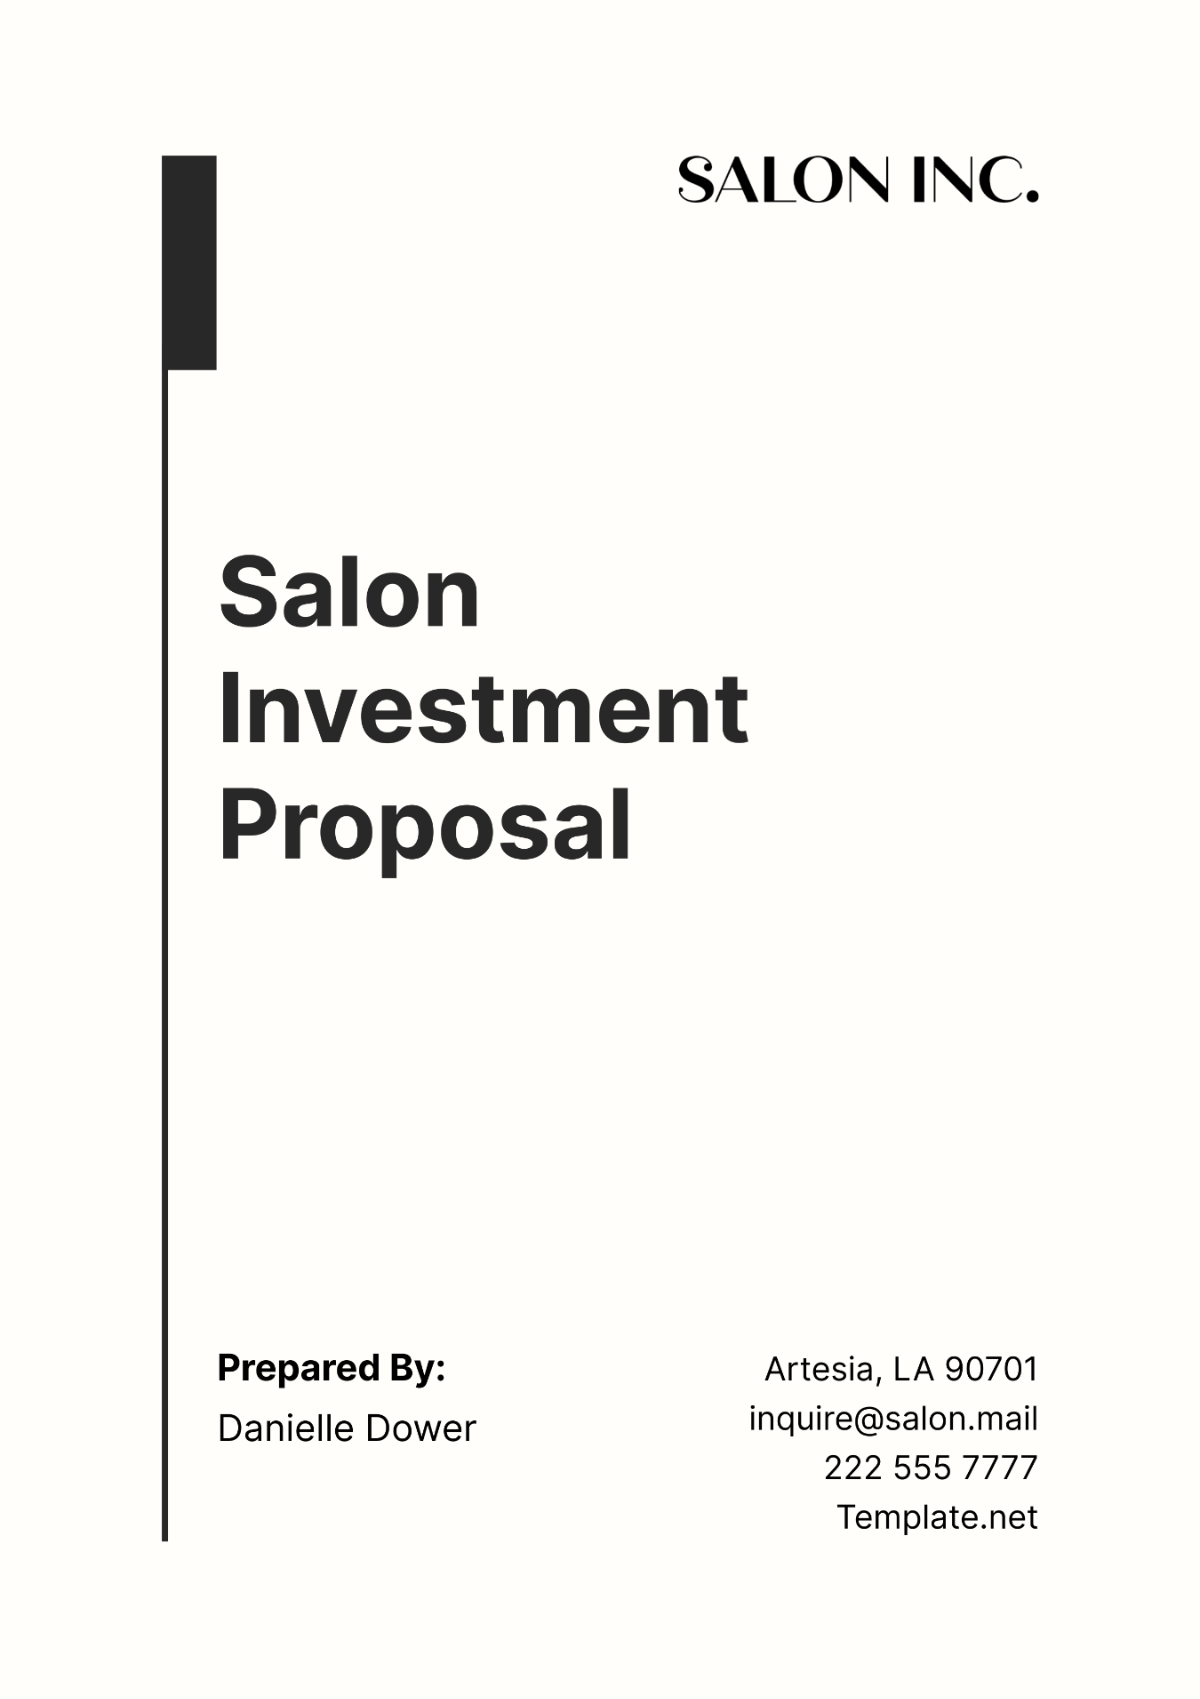 Salon Investment Proposal Template